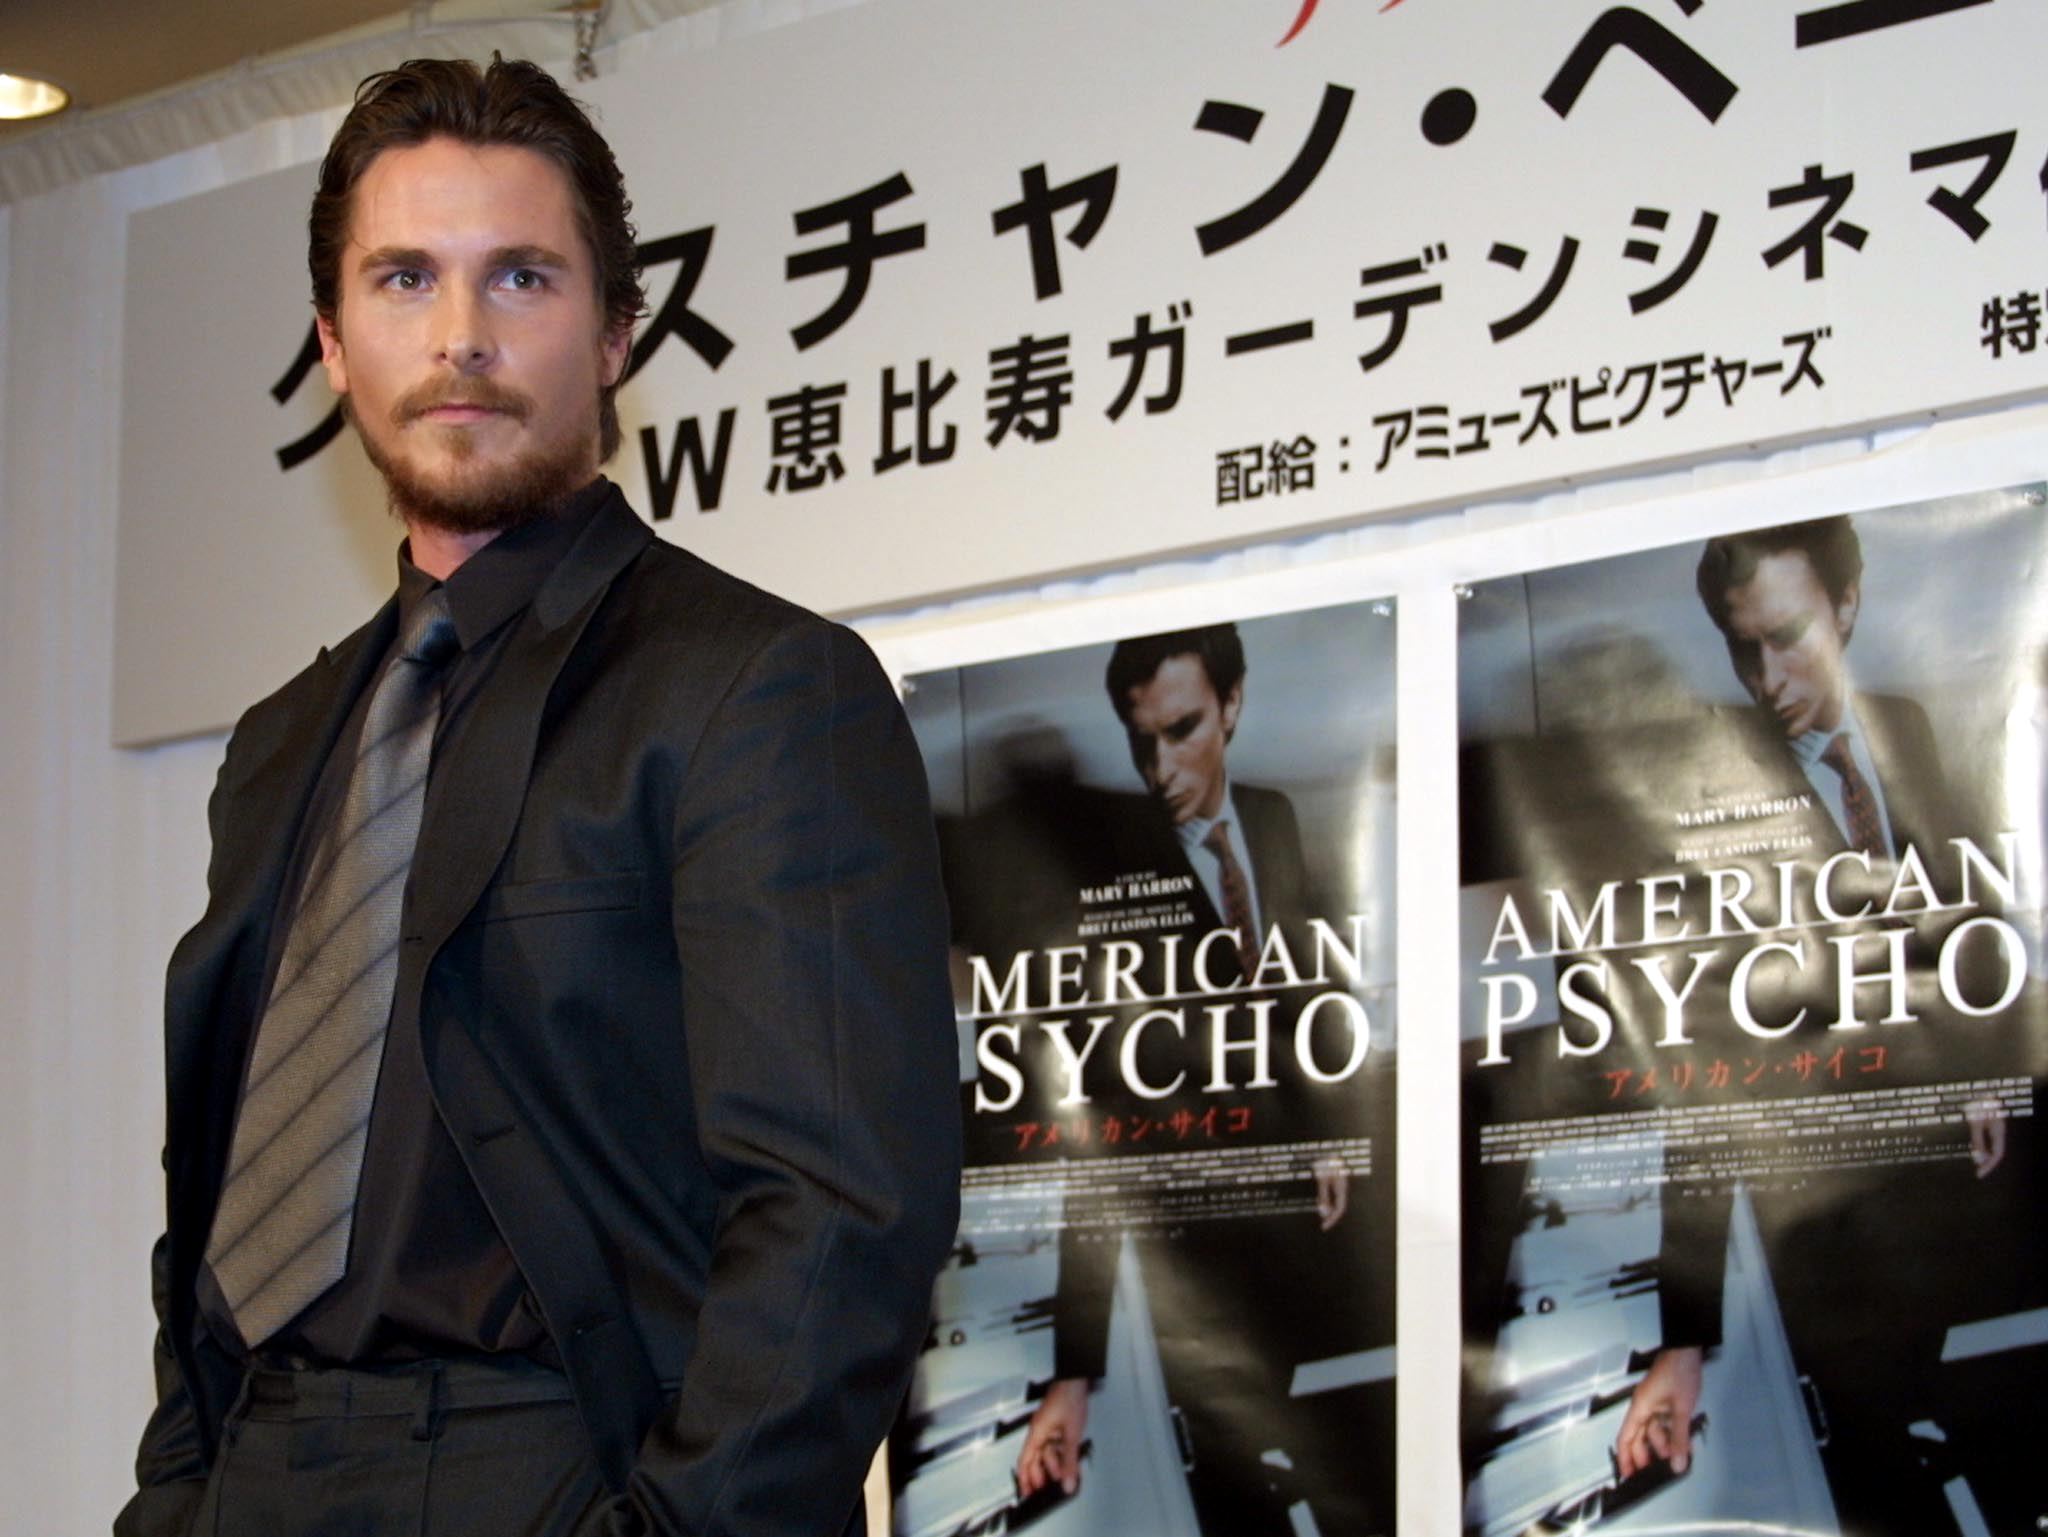 Christian Bale near posters for American Psycho